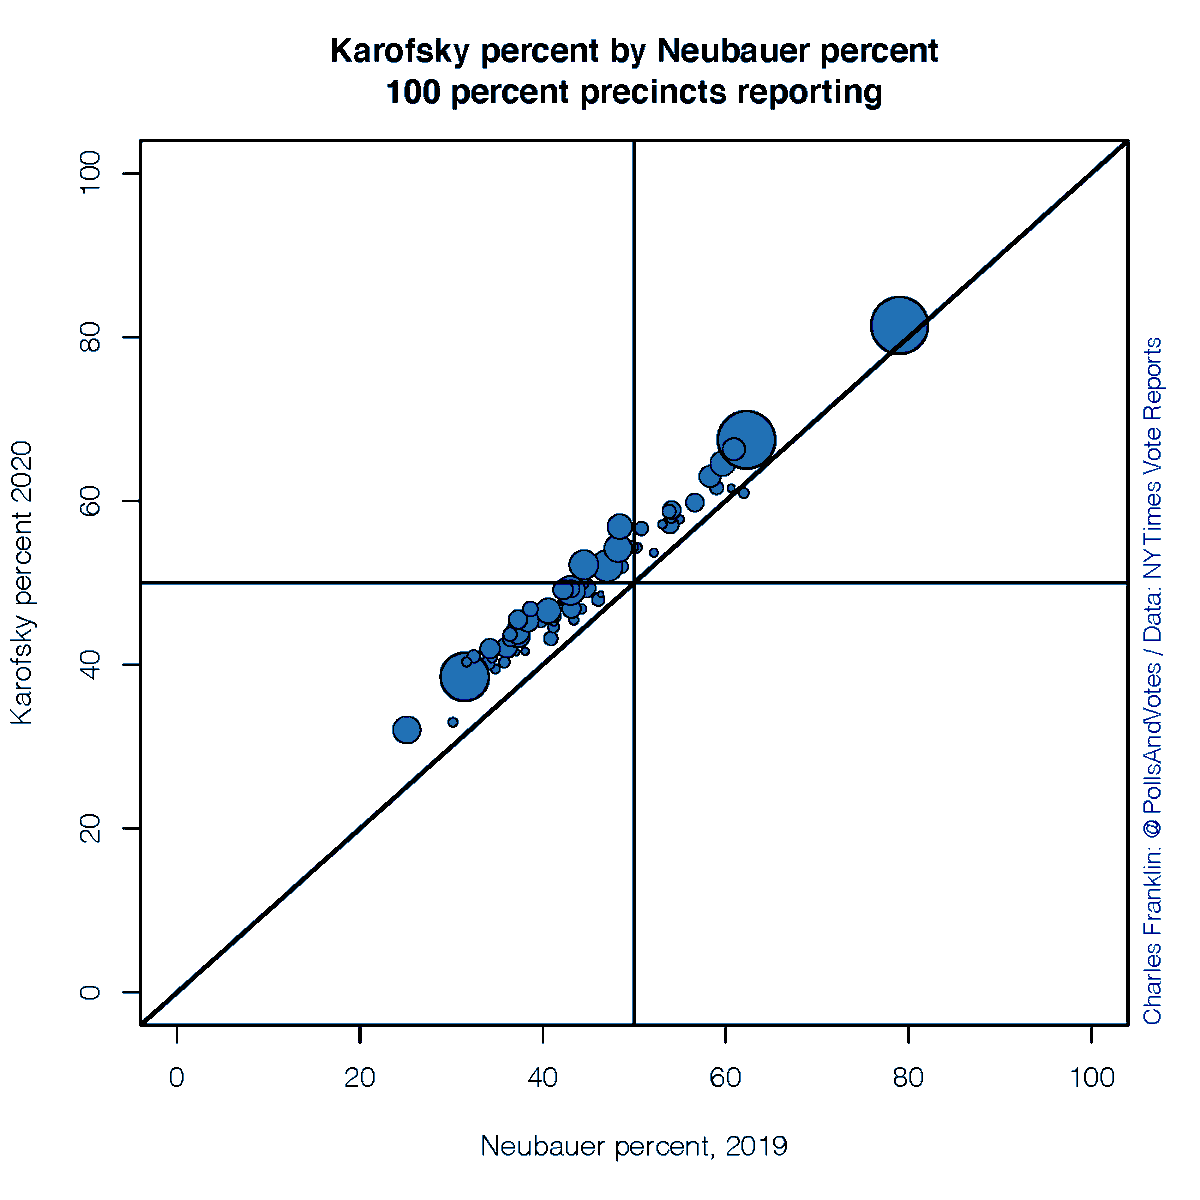 Bottom line: Karofsky out-performed the 2019 liberal candidate almost everywhere, and Kelly underperformed the 2019 conservative candidate. This was across the political spectrum of counties, so the outcome was not driven by a special set of places or turnout surges. 1/n